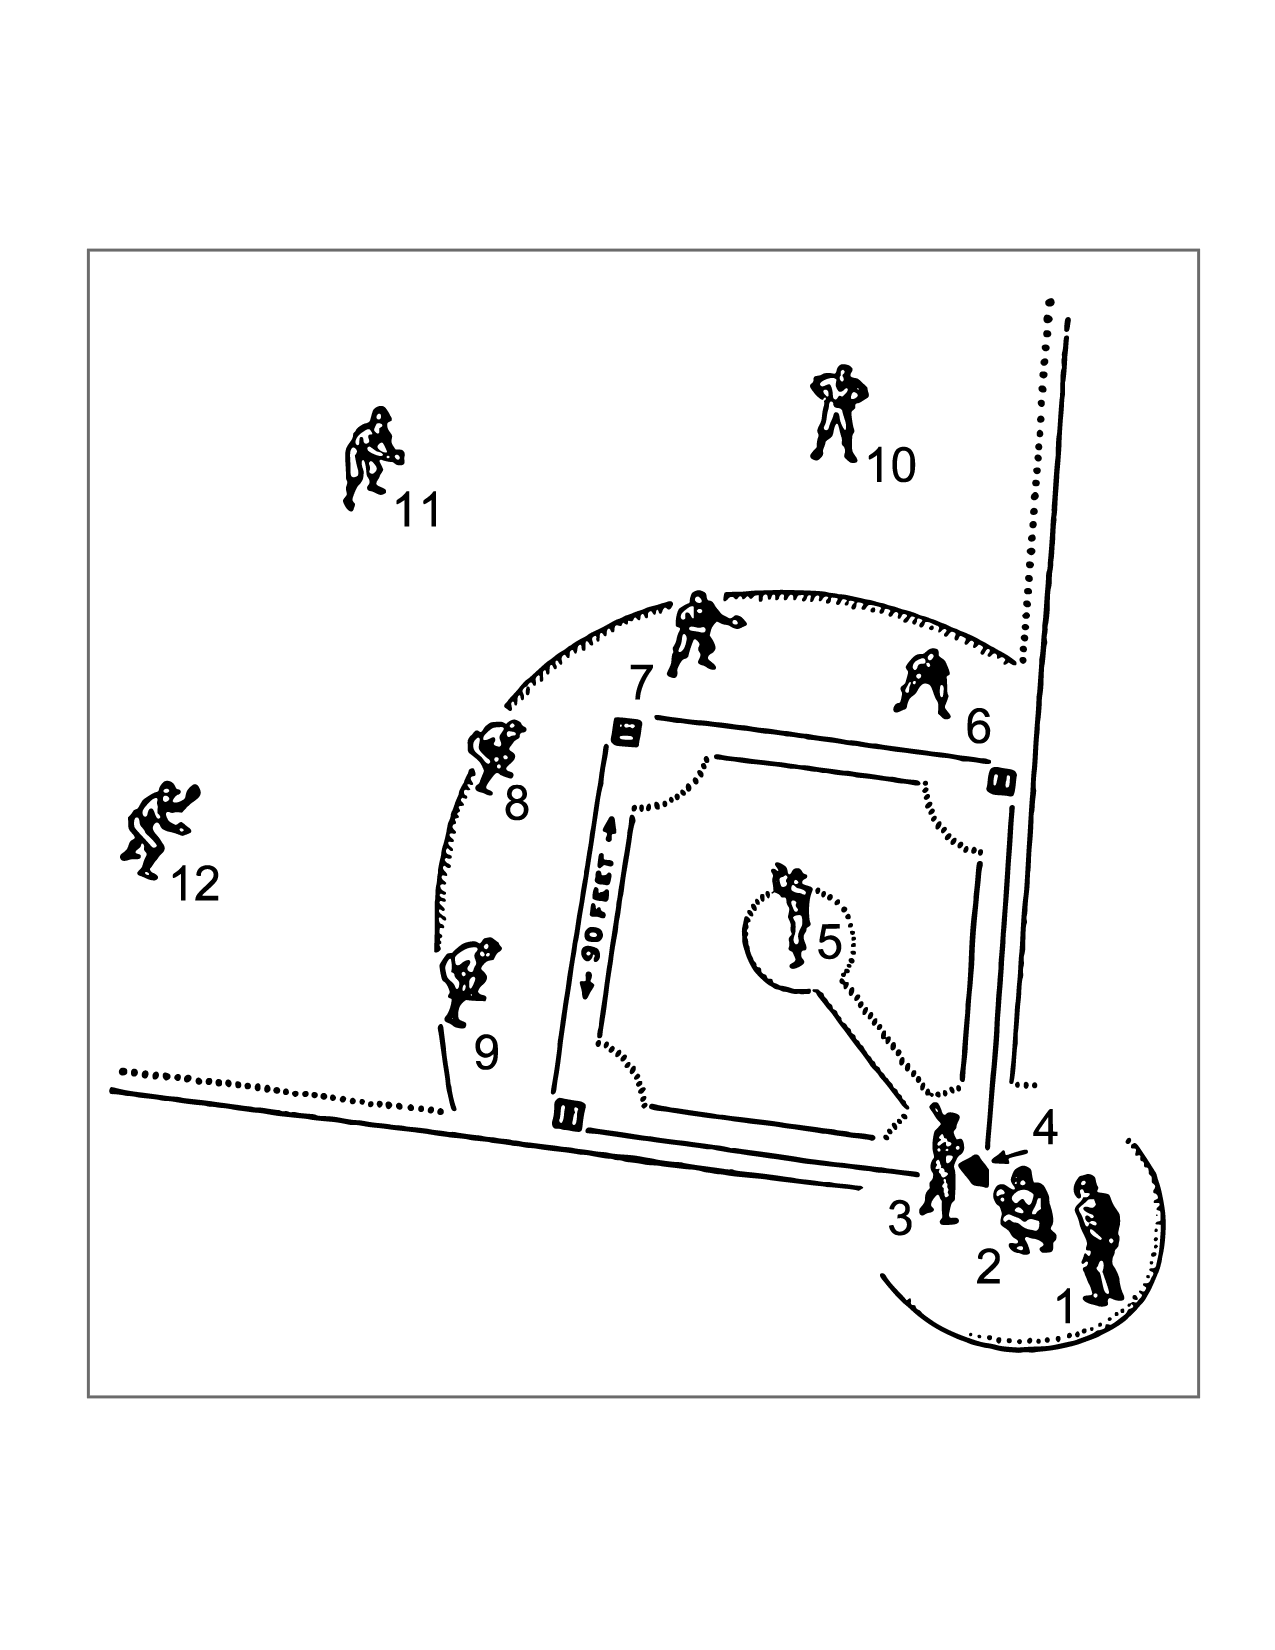 Baseball Field Positions Coloring Page